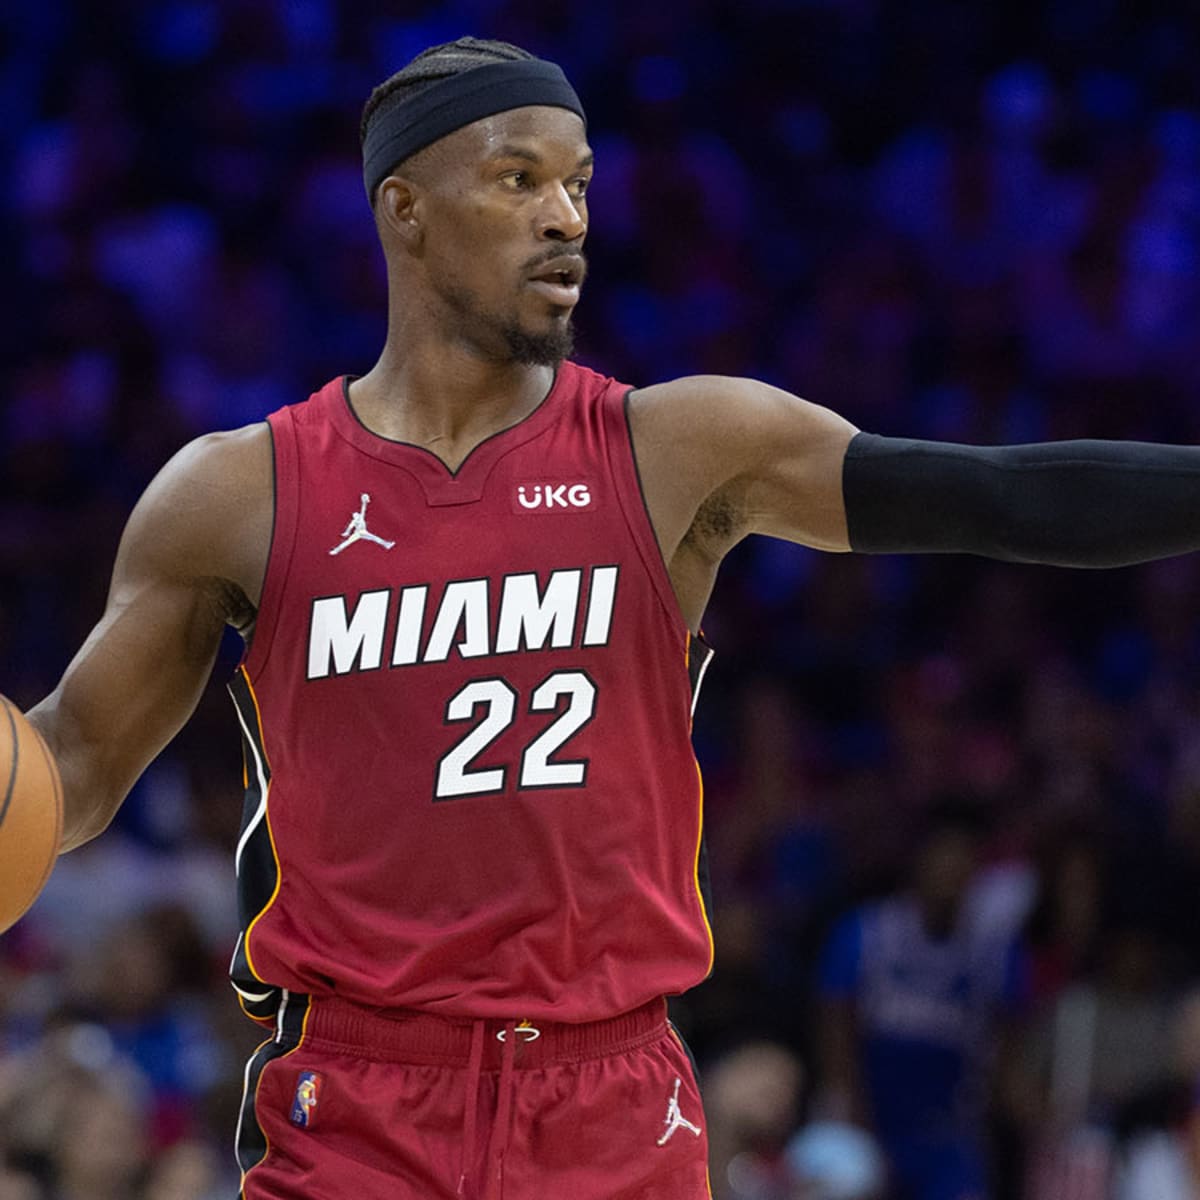 Heat Check - Jimmy Butler needed just one season in Miami to show